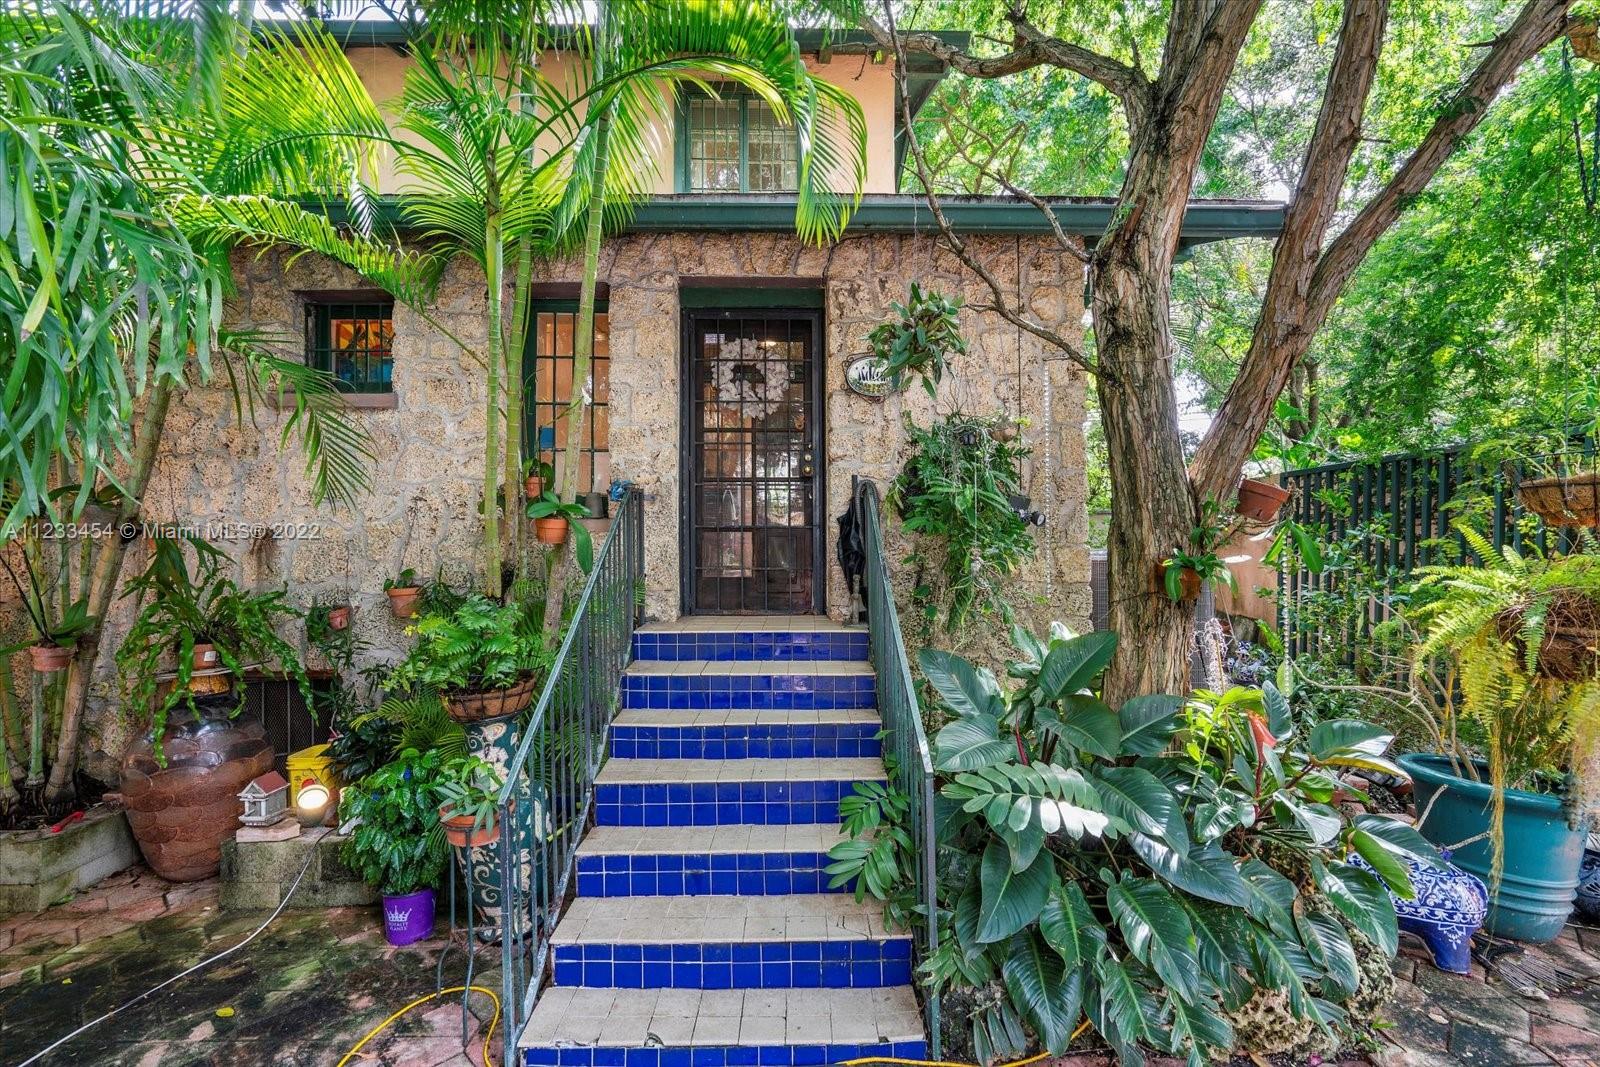 This rare historic home is zoned residential and commercial giving this property unlimited
possibilities. Built in 1921 and hidden behind privacy walls, this home is one of a kind in the heart of Coconut
Grove. This corner lot features a 3 bedroom/2 bathroom main house and 1 bedroom/2 bath guest cottage. Behind the privacy walls there is parking for 8! House features beautiful oolitic limestone exterior walls and the fireplace has an oolitic limestone mantle, beautiful original wood doors and solid hardwood floors upstairs, tiles downstairs, crown molding throughout and a galley kitchen. Main house has 1/1 master bedroom downstairs and 2/1 guest beds upstairs. Located on the back side of Cocowalk, which is less than a block away. This is a true diamond in the rough.